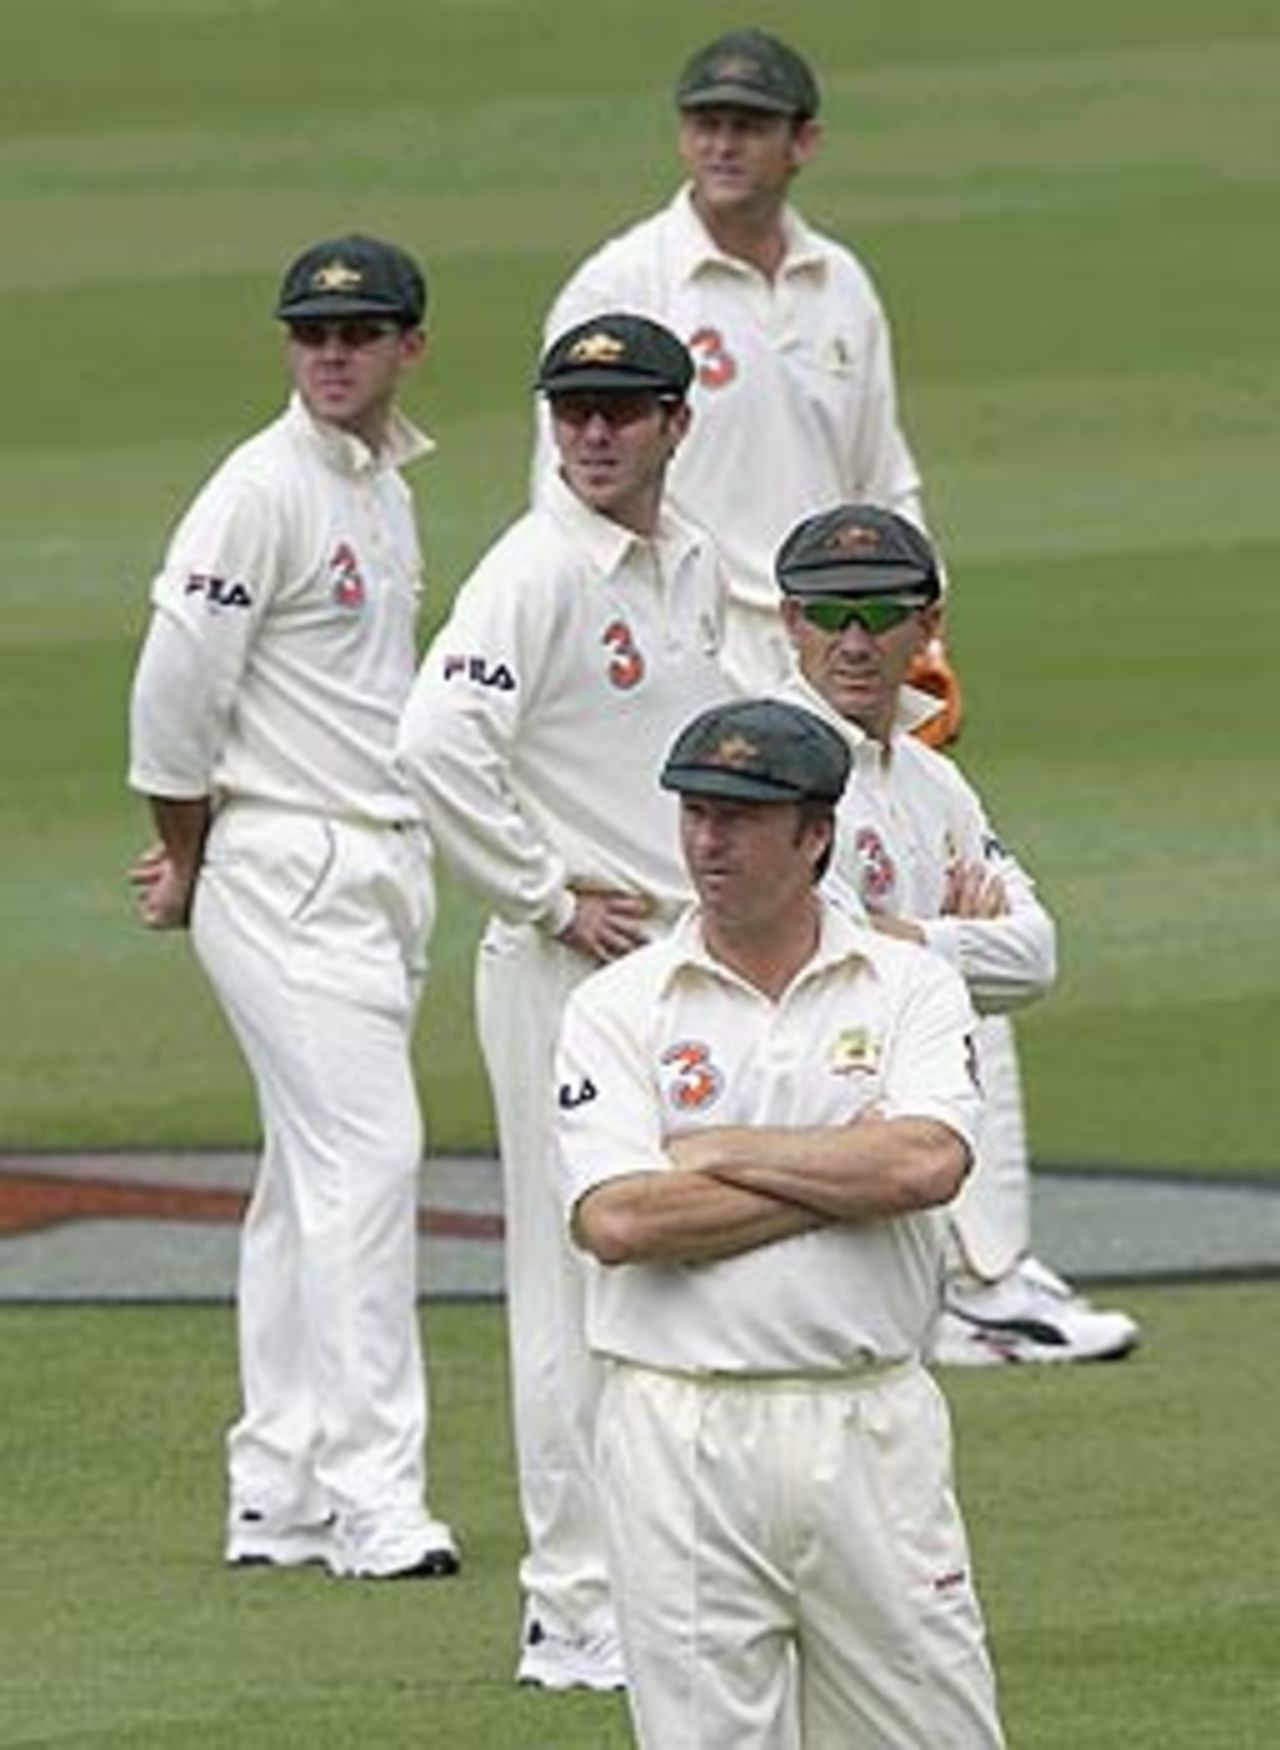 The general with his troops - Steve Waugh and his men look into the distance, Australia v India, 1st Test, Brisbane, 4th day, December 7, 2003